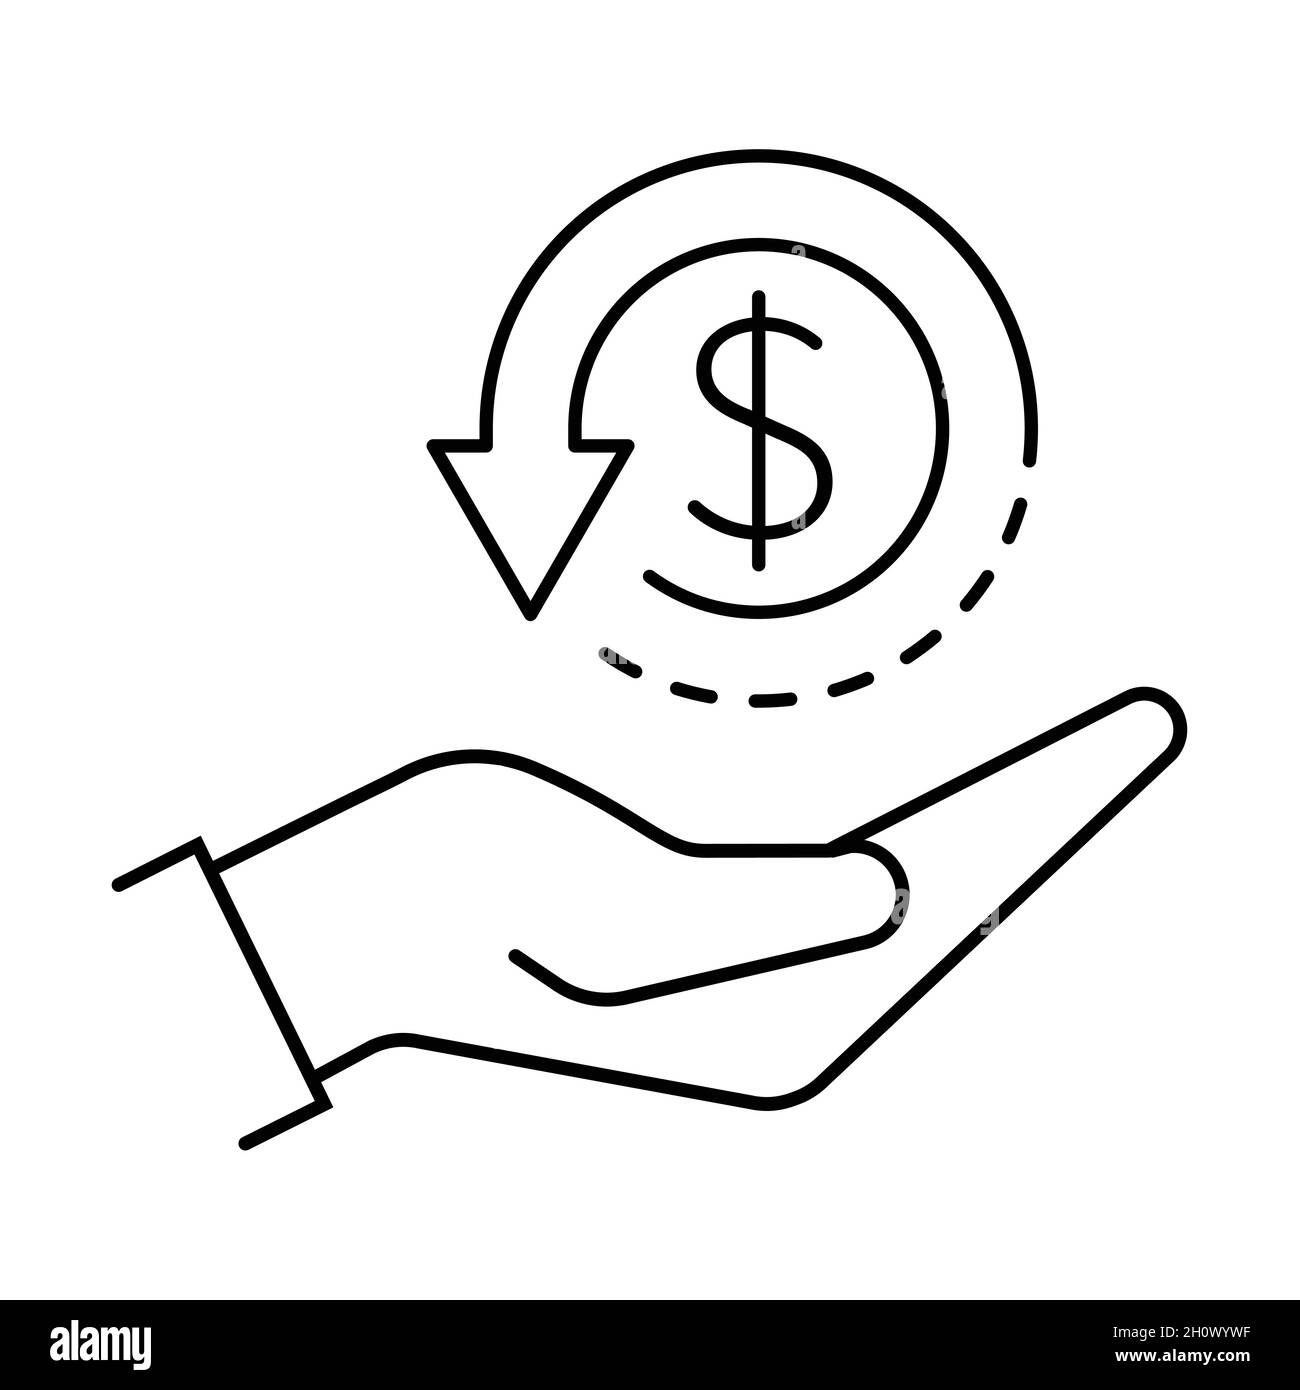 Cashback Icon Vector Return Money Cash Back Rebate Hand And Coin Sign 